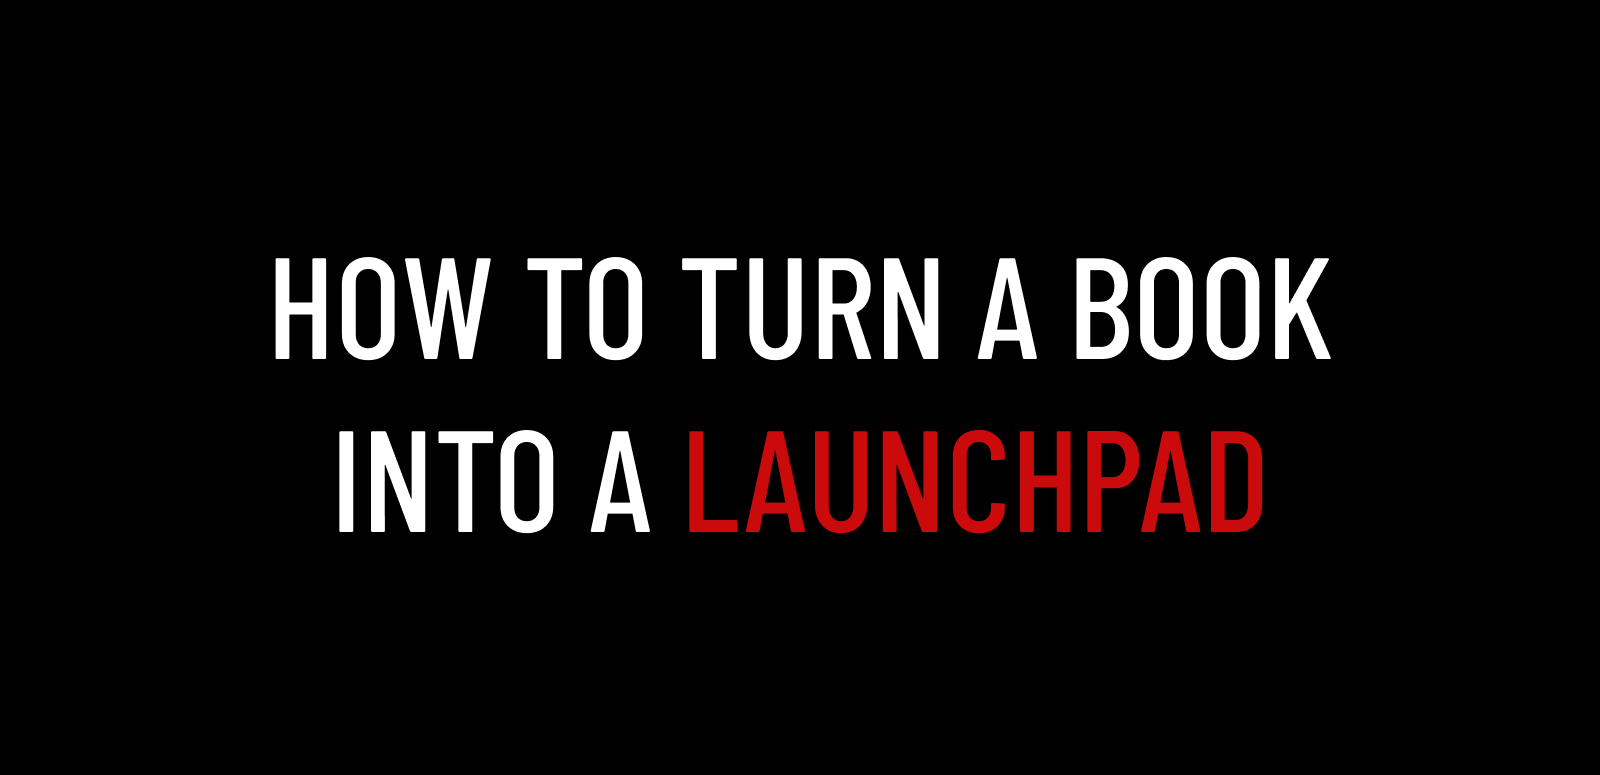 How to turn a book into a launchpad